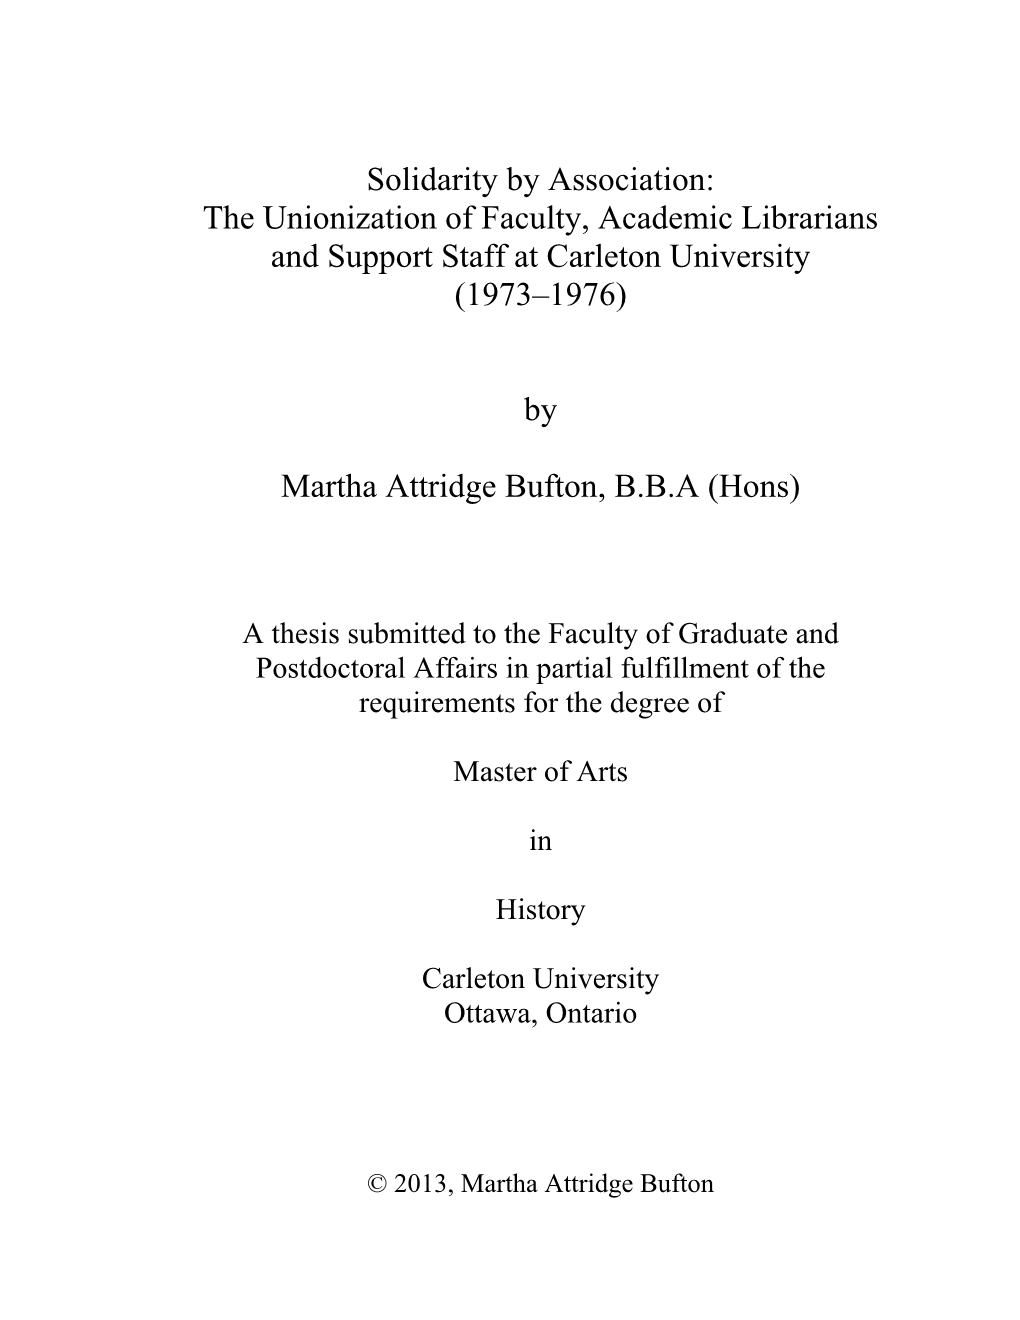 The Unionization of Faculty, Academic Librarians and Support Staff at Carleton University (1973–1976)